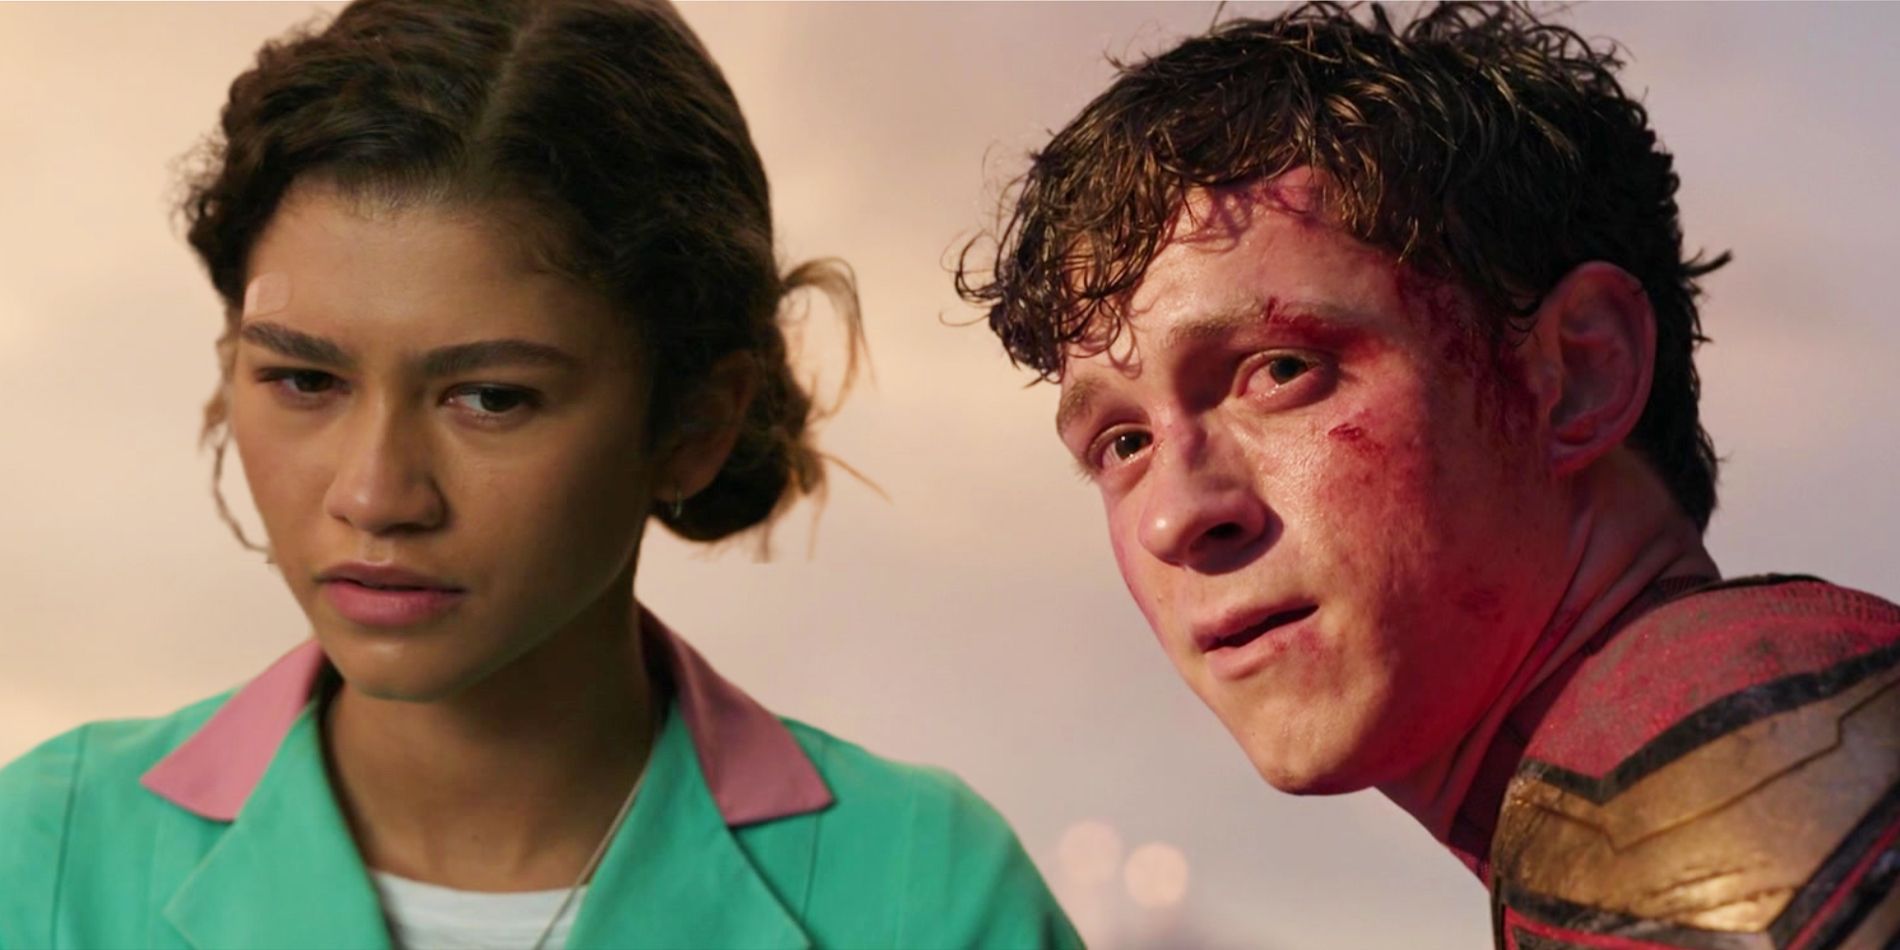 Zendaya as MJ in No Way Home next to Tom Holland as Spider-Man without his mask.